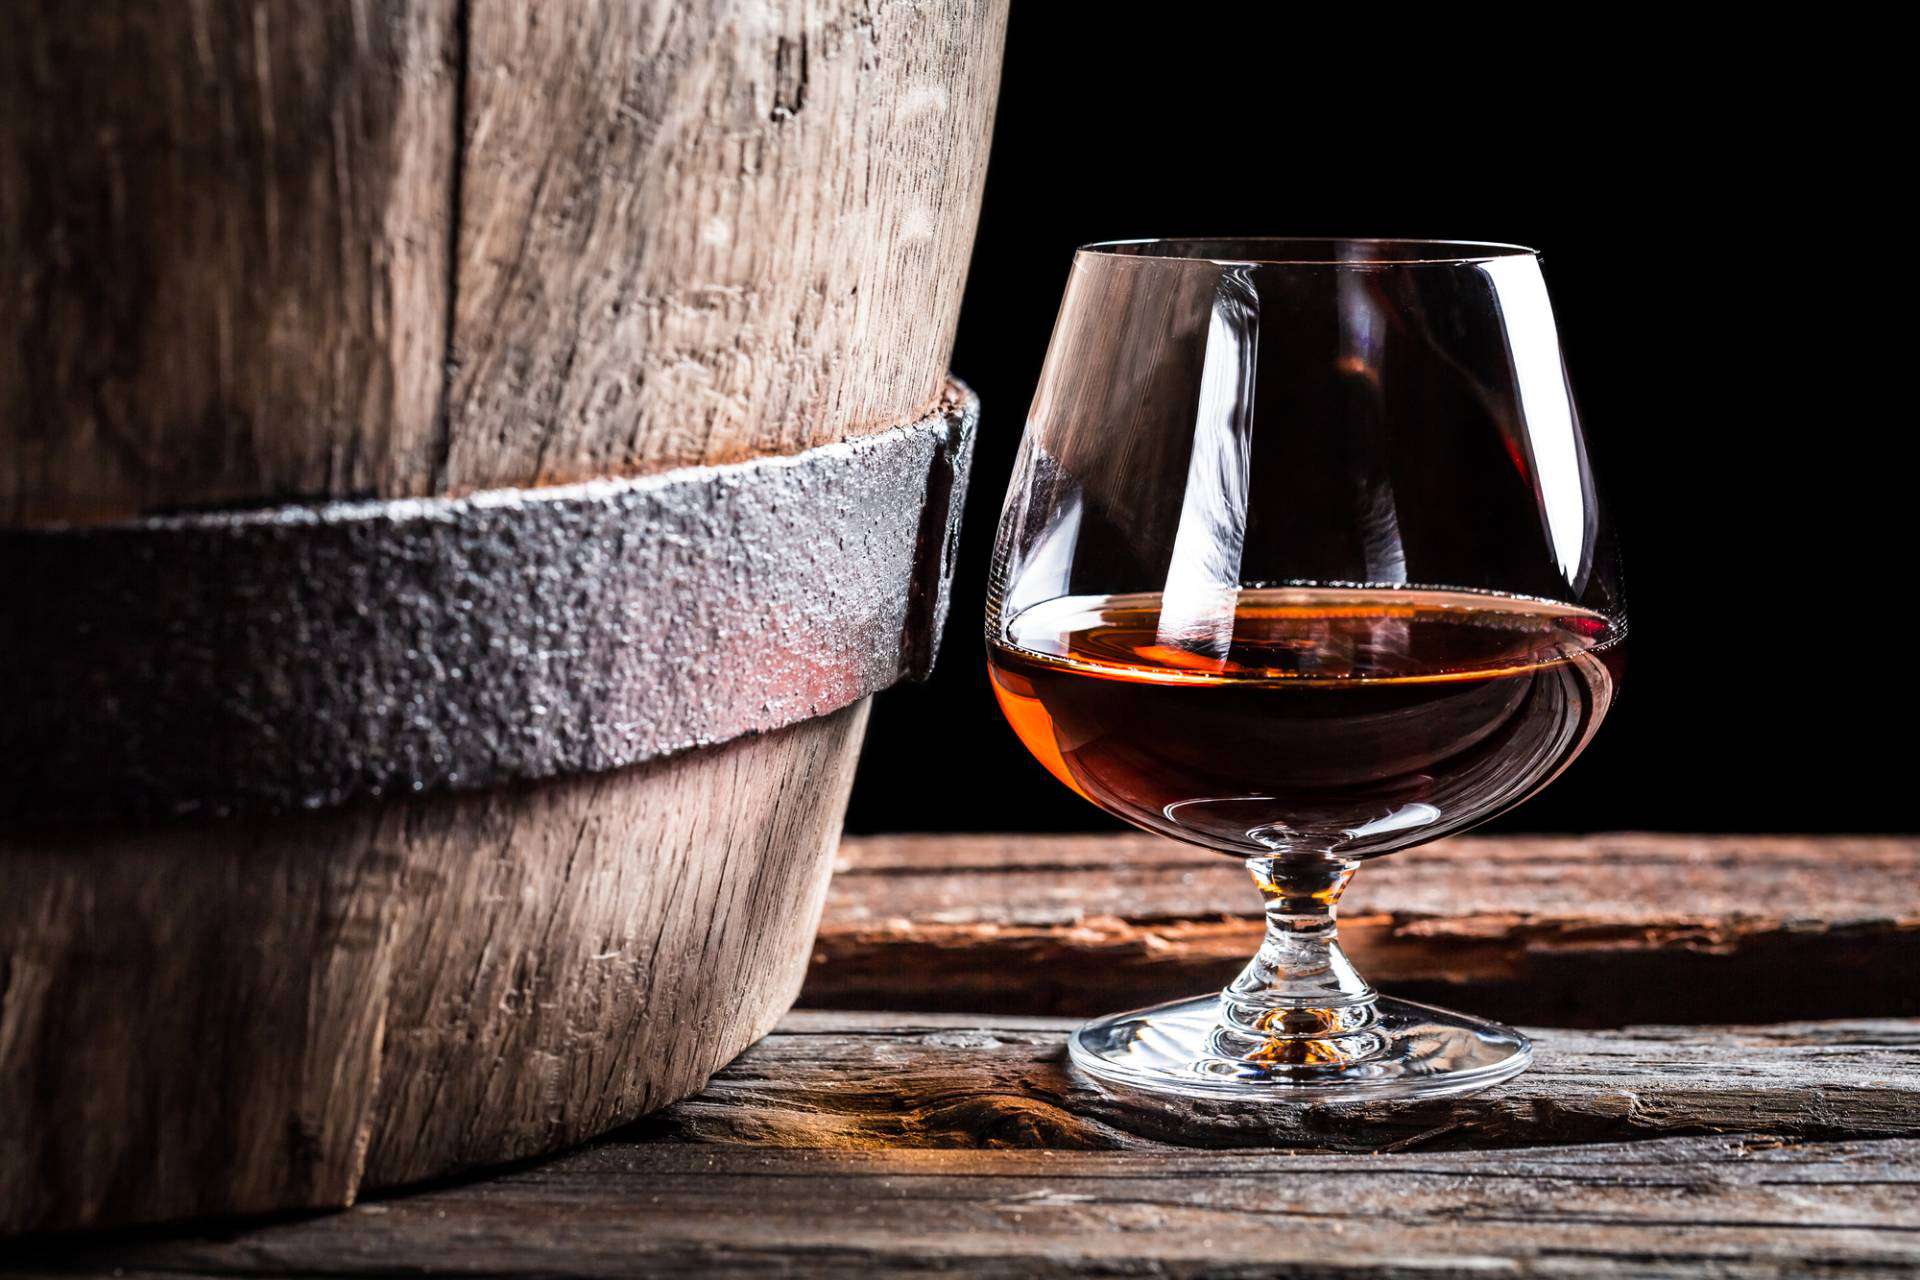 What is difference between Cognac, Armagnac, and Brandy?